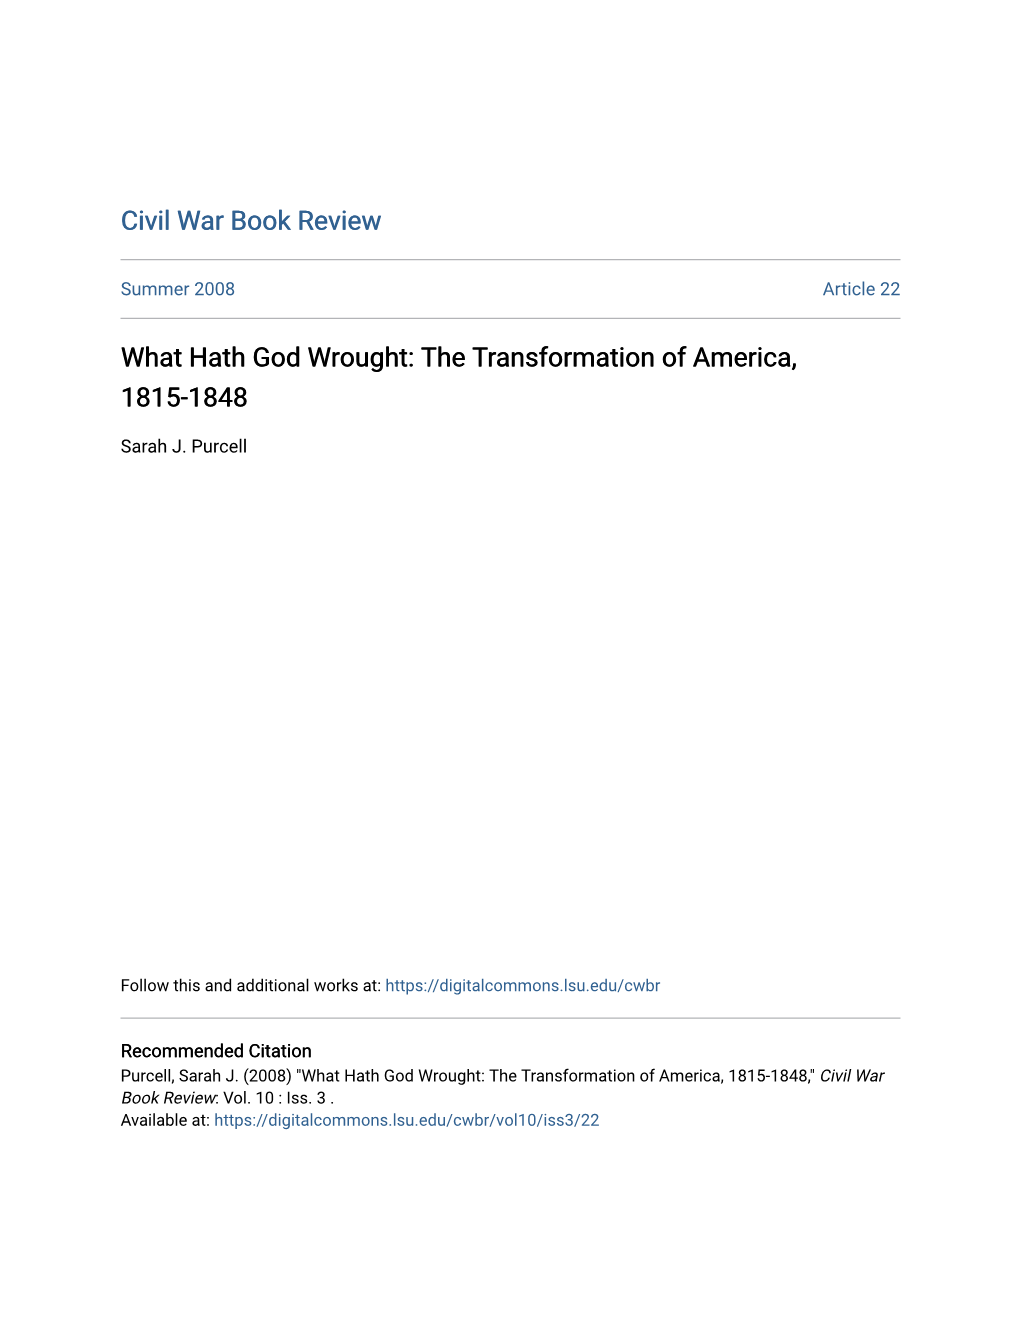 What Hath God Wrought: the Transformation of America, 1815-1848